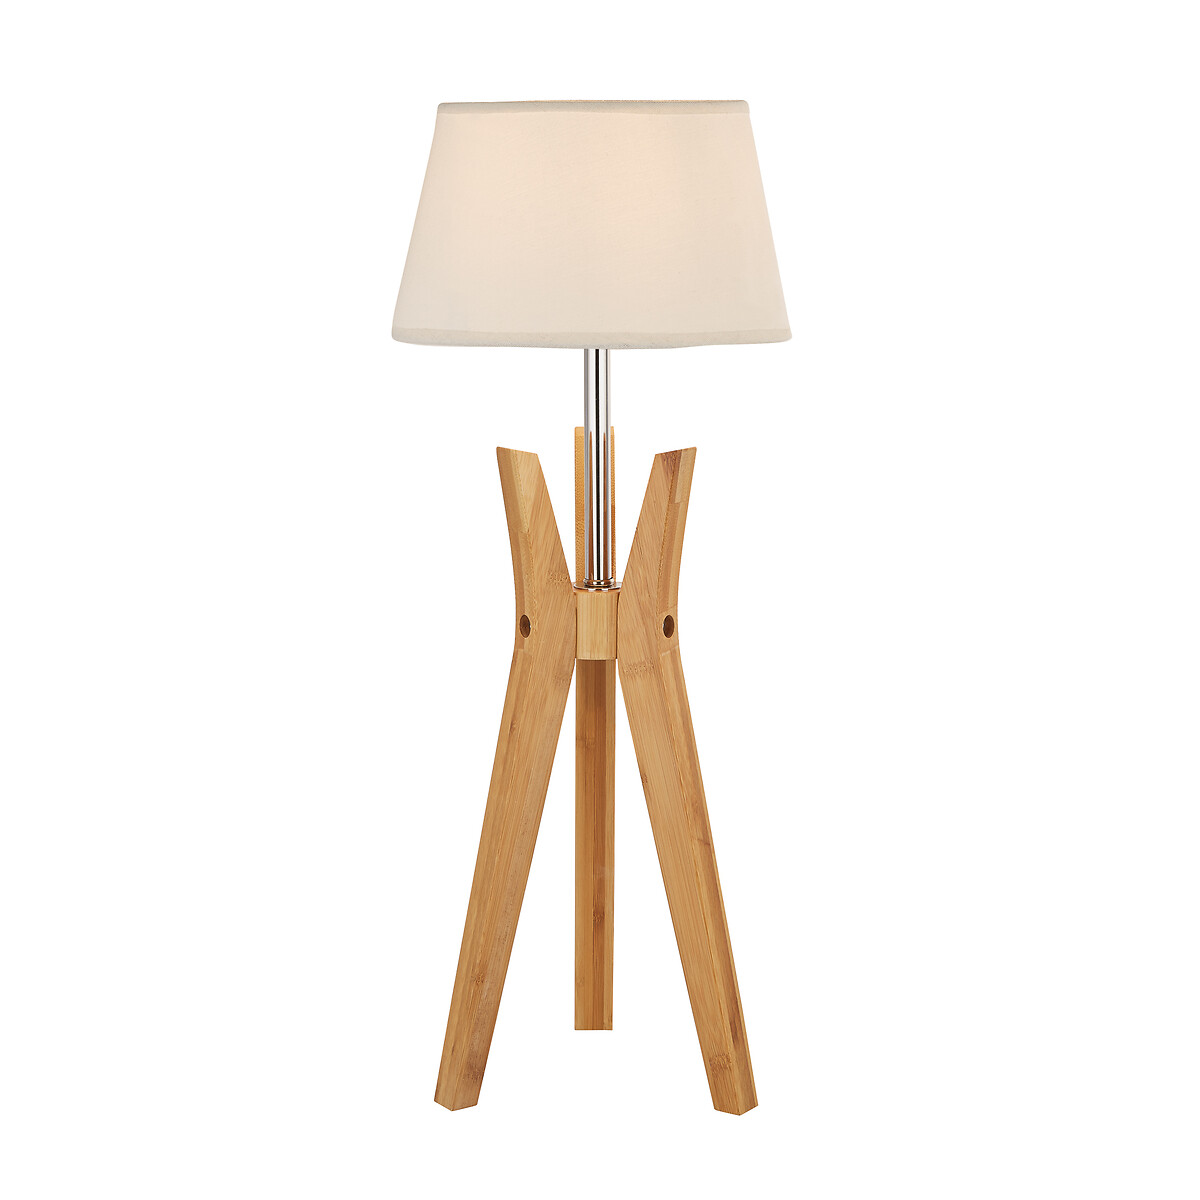 Tapered Natural Wood Tripod Table Lamp, White And Natural Wood Table Lamp